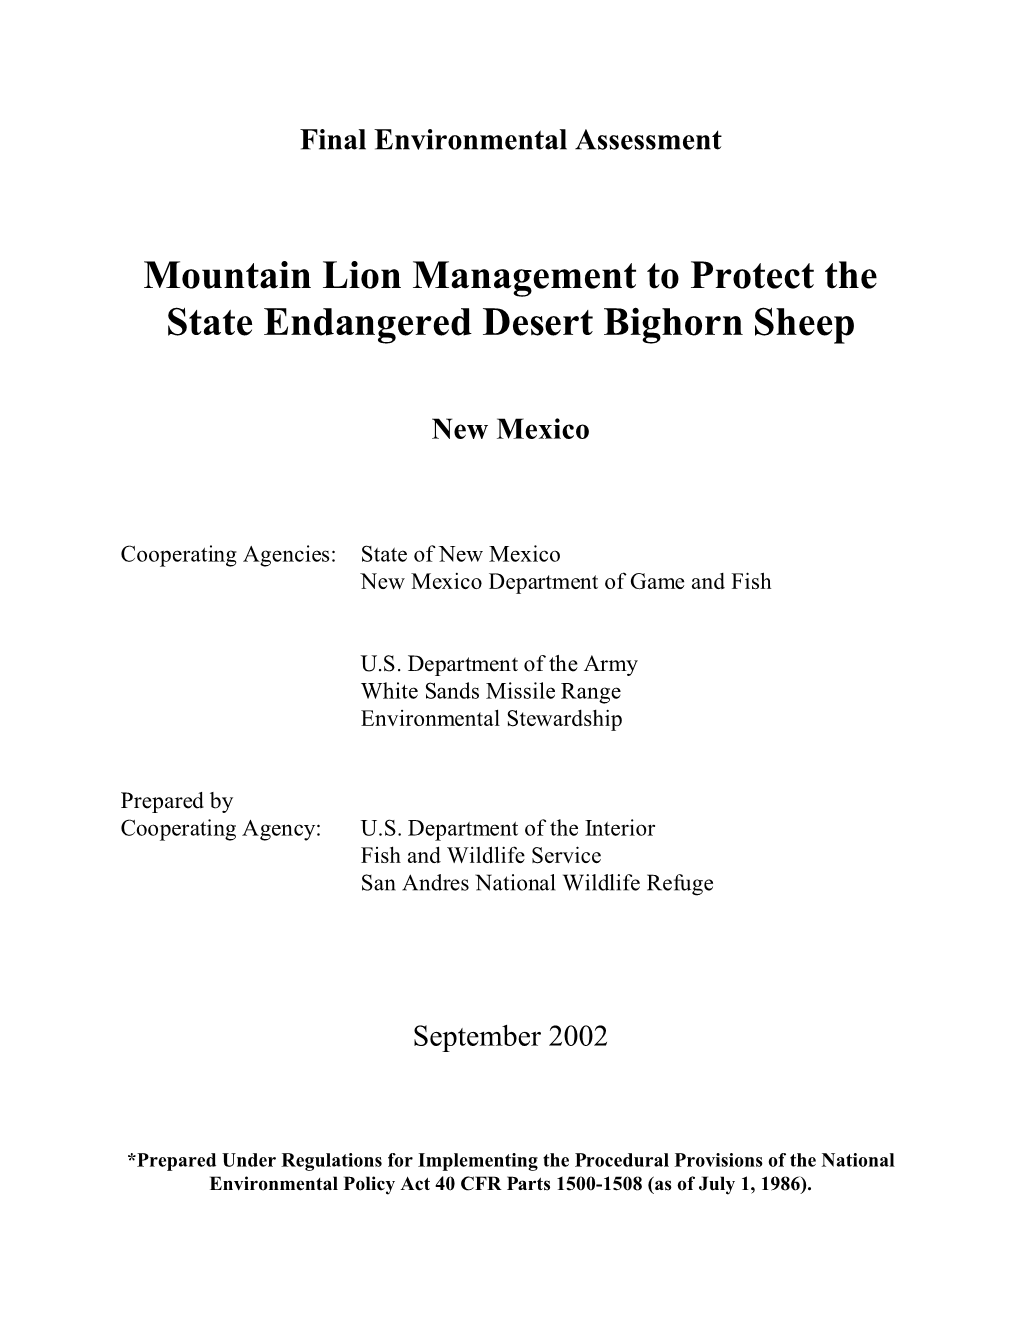 Mountain Lion Management to Protect the State Endangered Desert Bighorn Sheep